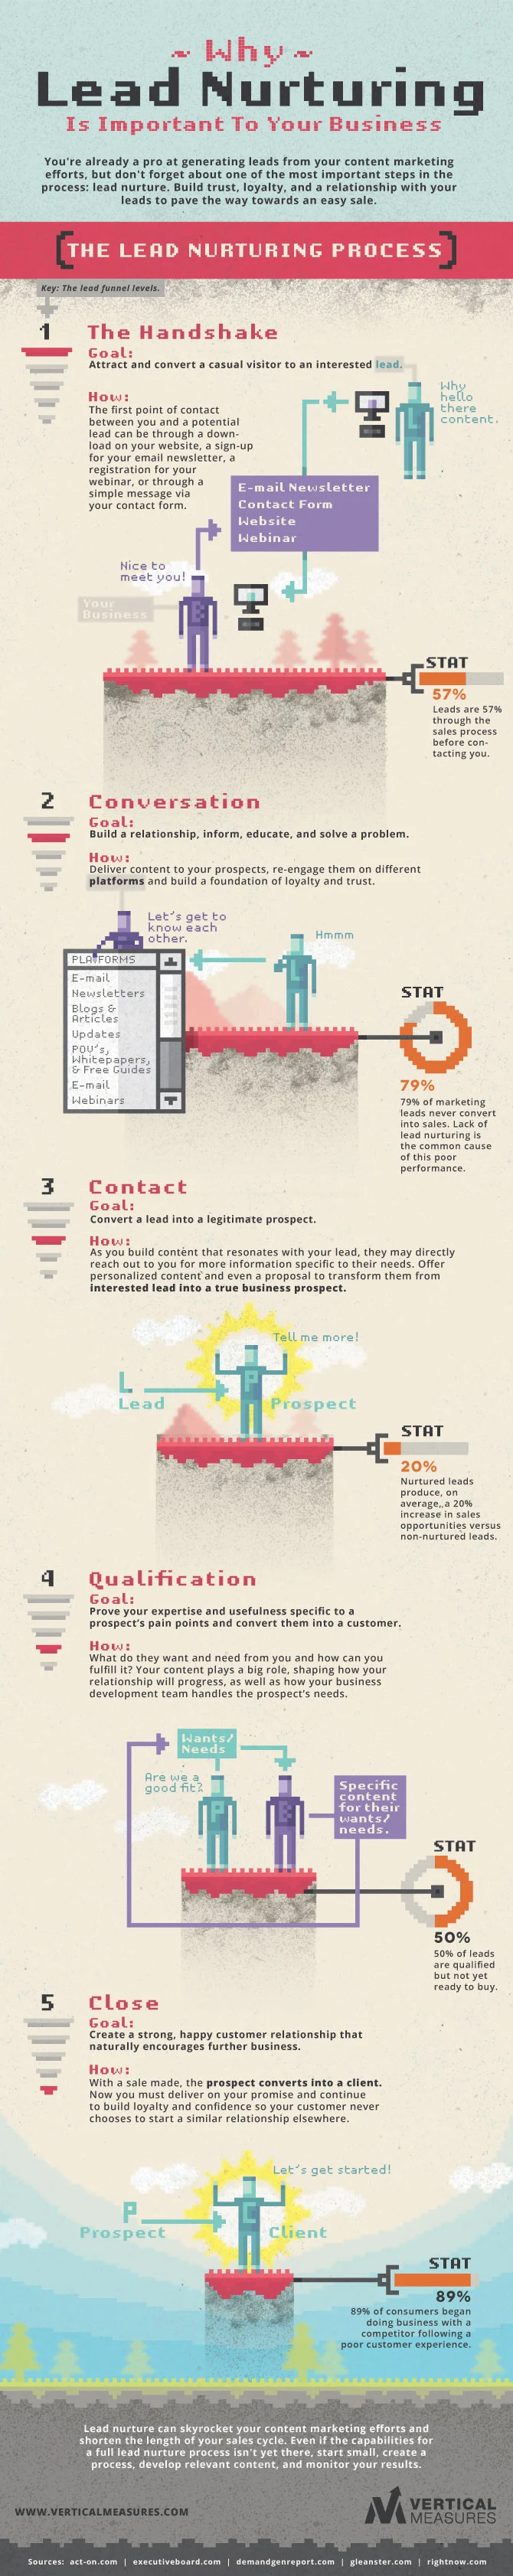 Why Lead Nurturing Is Important To Your Business - infographic